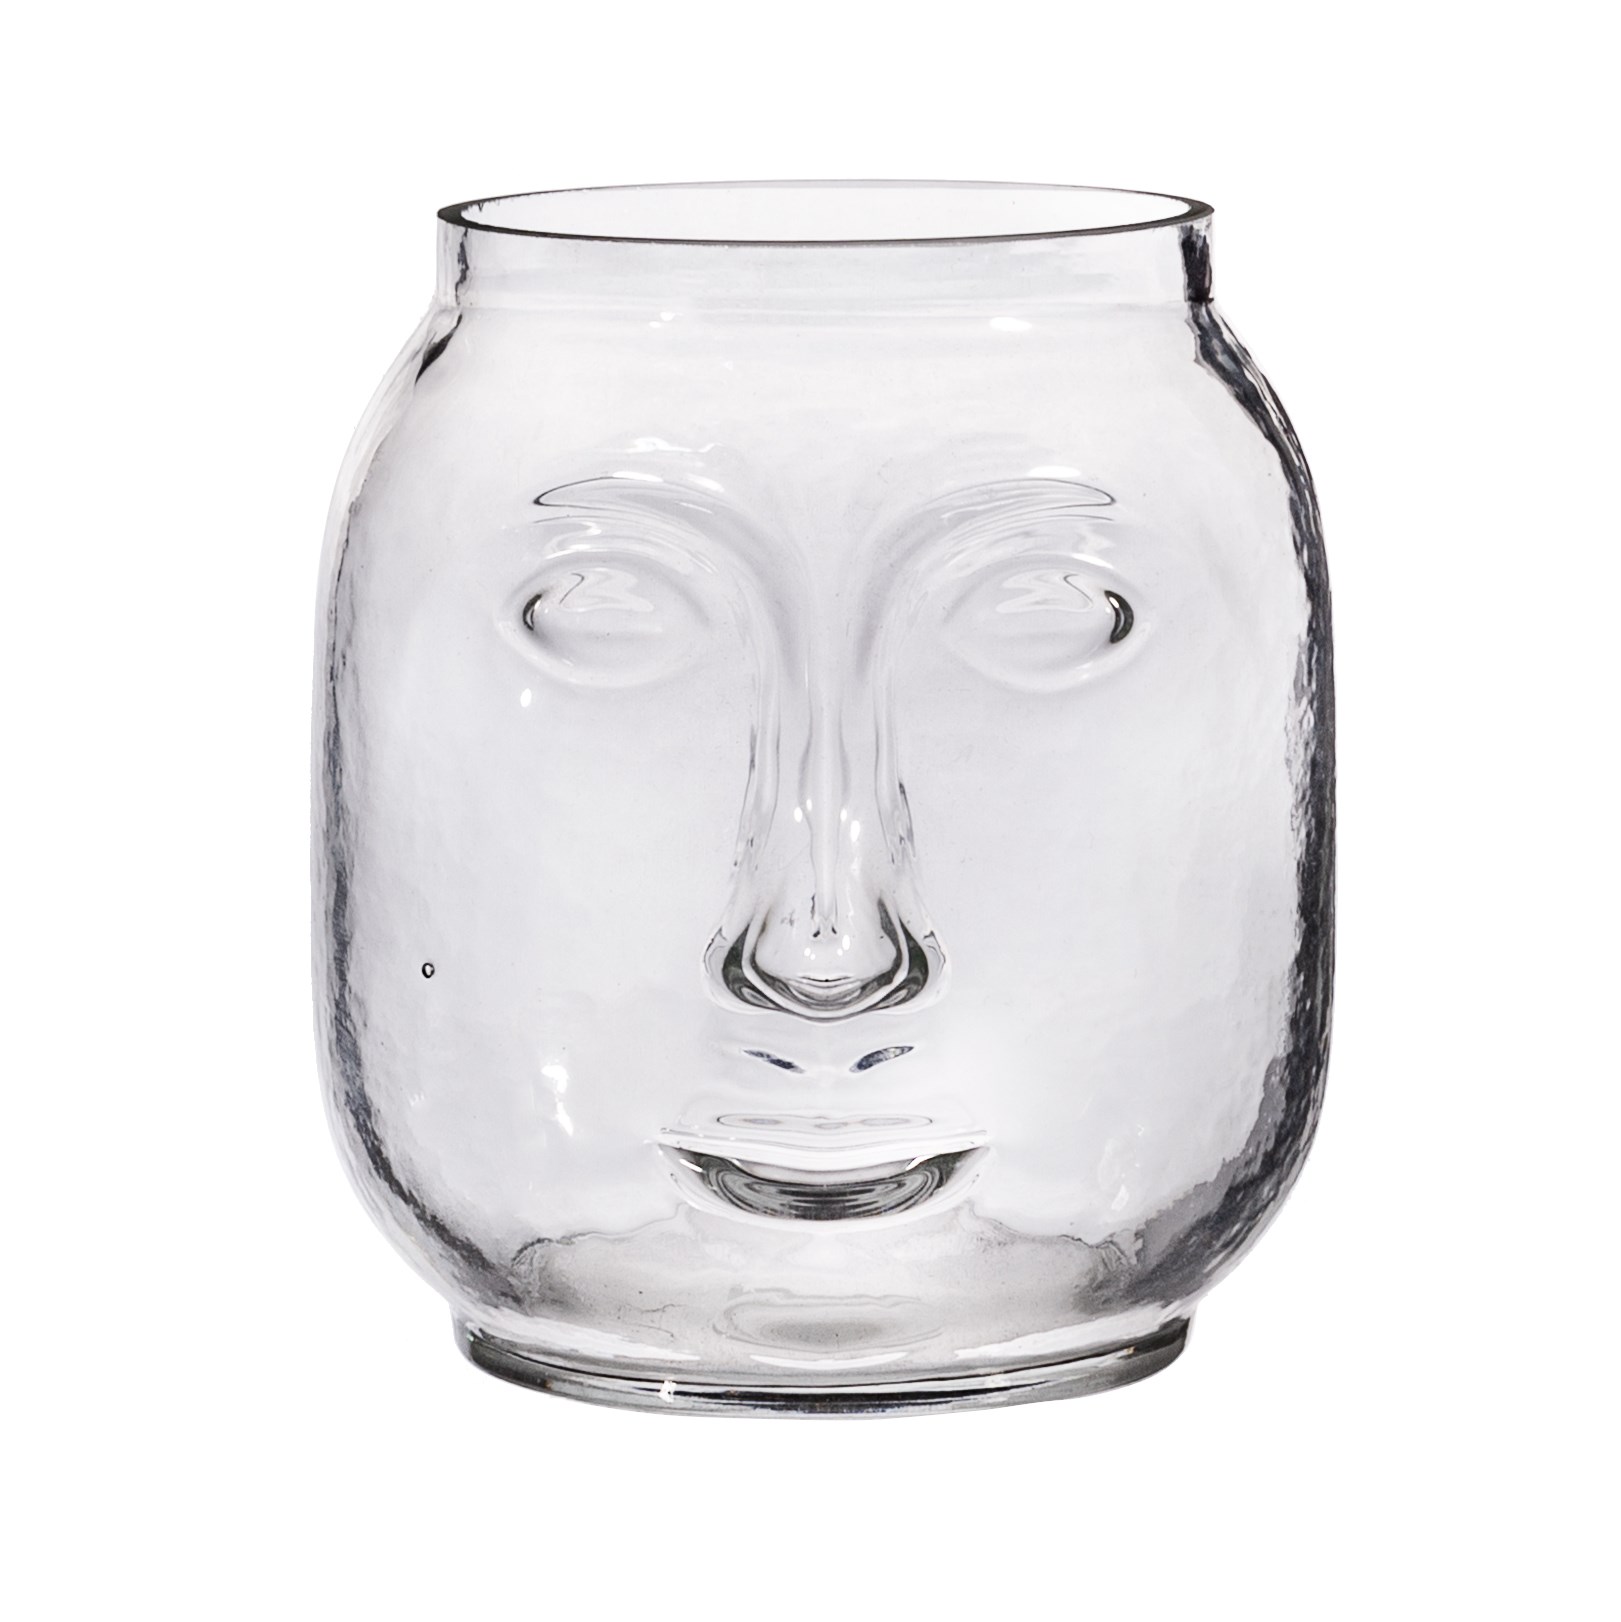 RJB Stone Clear Glass "Face" Vase